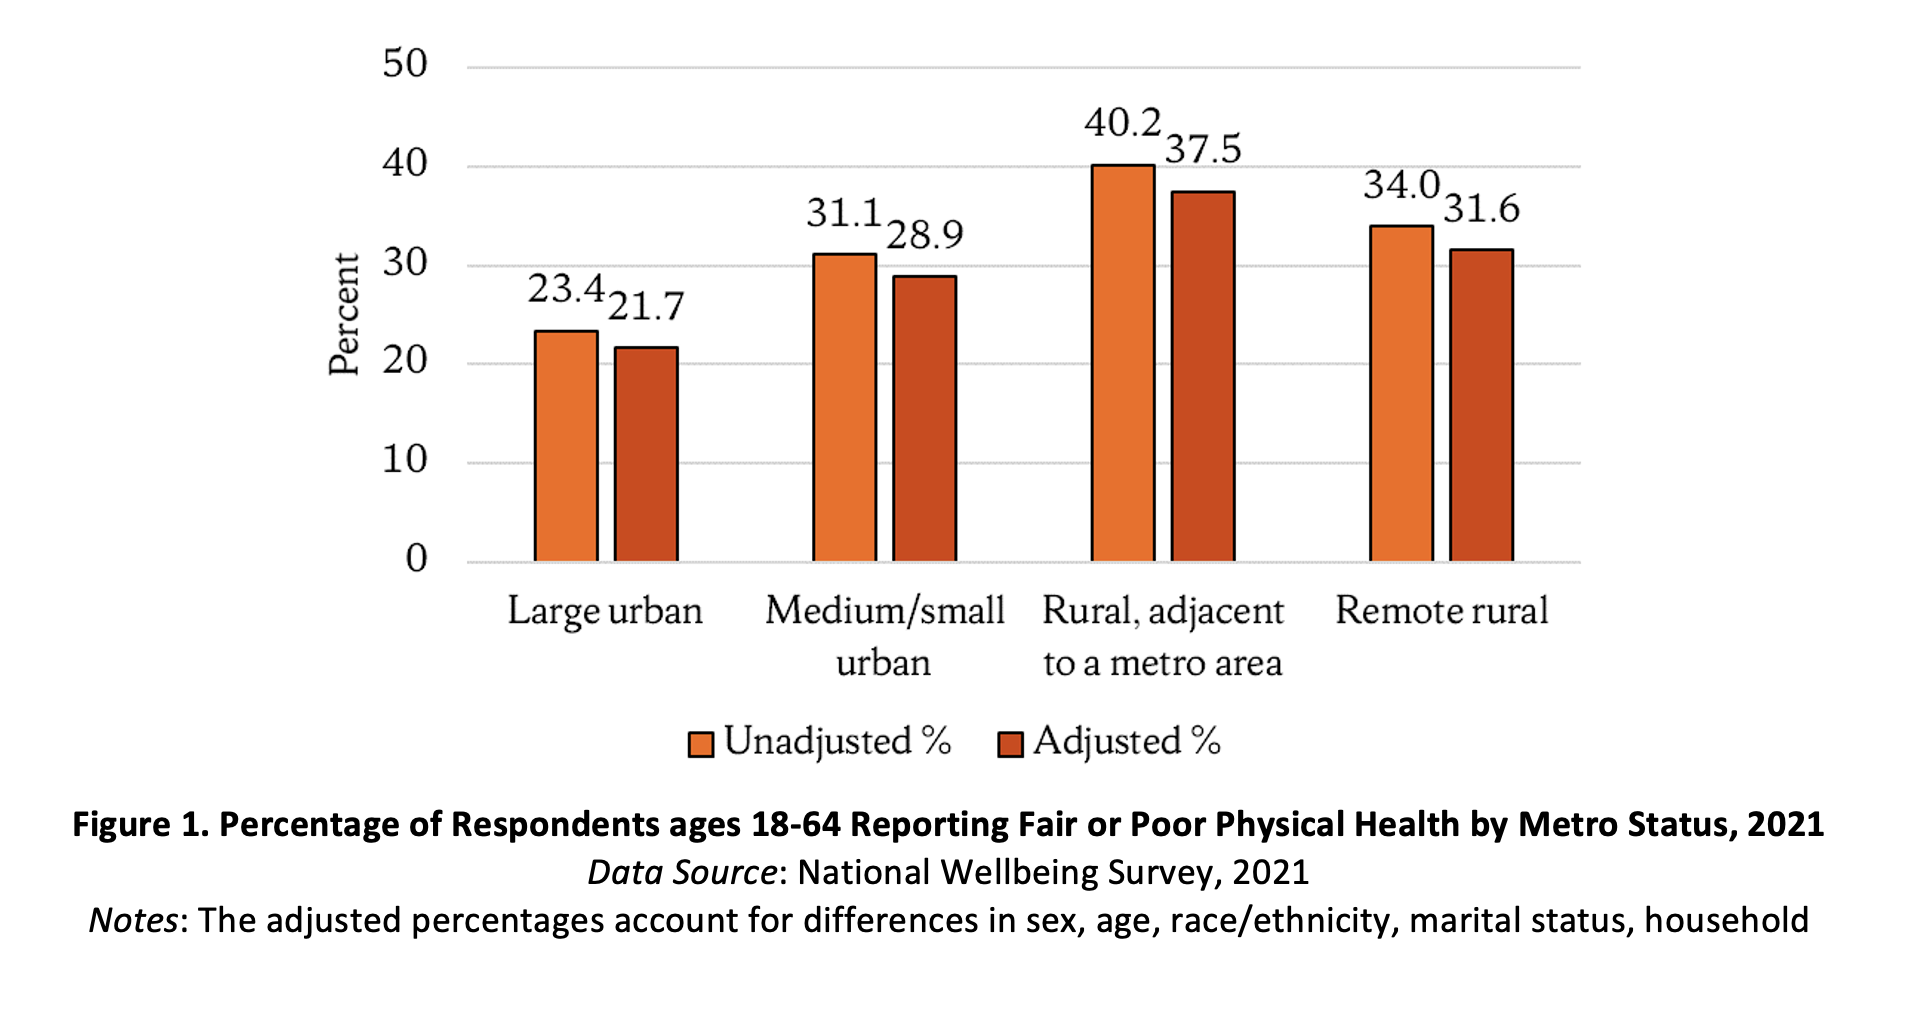 Percentage of Respondents ages 18-64 Reporting Fair or Poor Physical Health by Metro Status, 2021